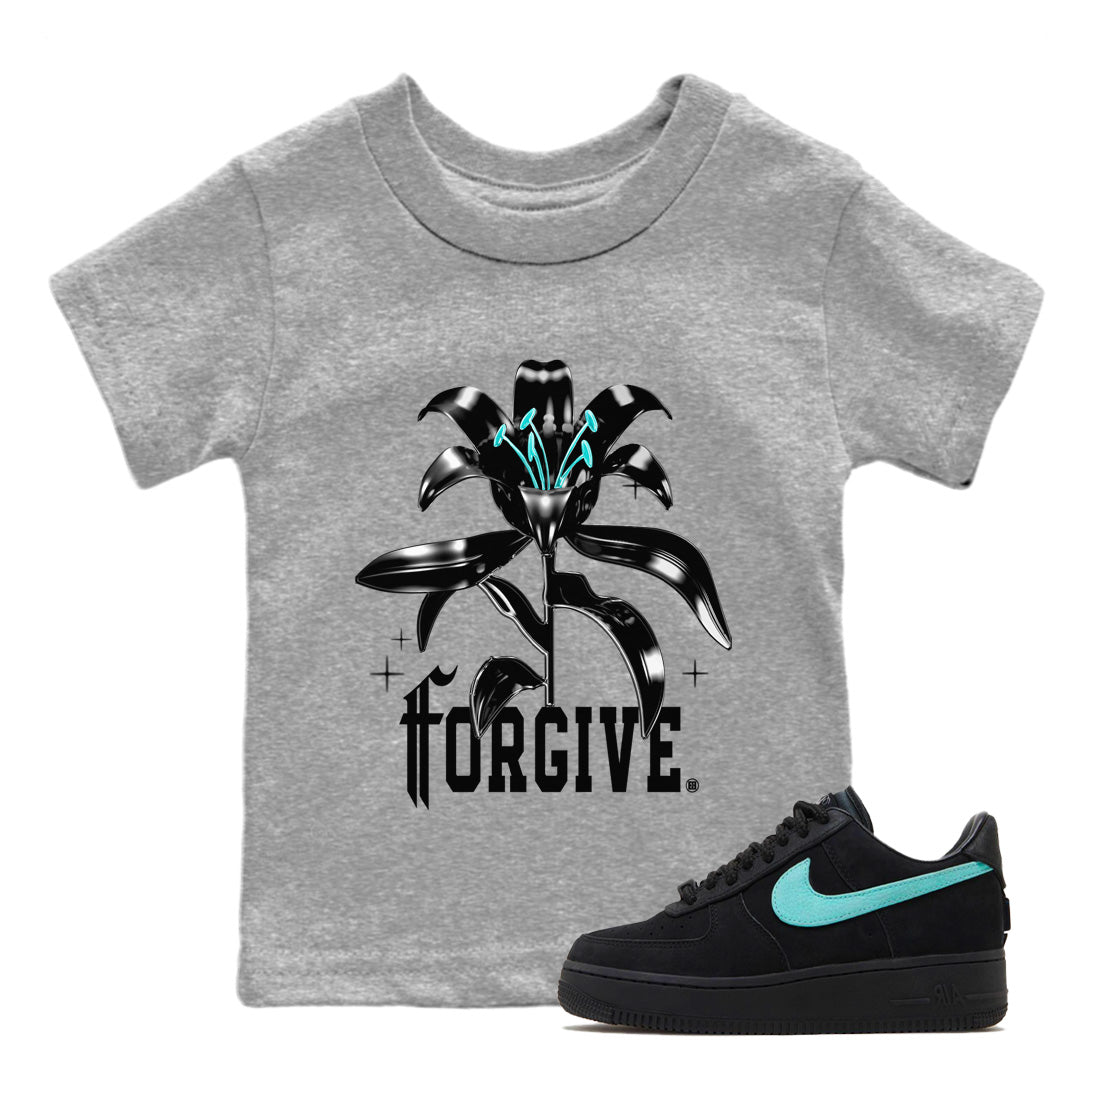 Air Force 1 Tiffany Forgive Baby and Kids Sneaker Tees Air Force 1 Low x Tiffany & Co Kids Sneaker Tees Size Chart